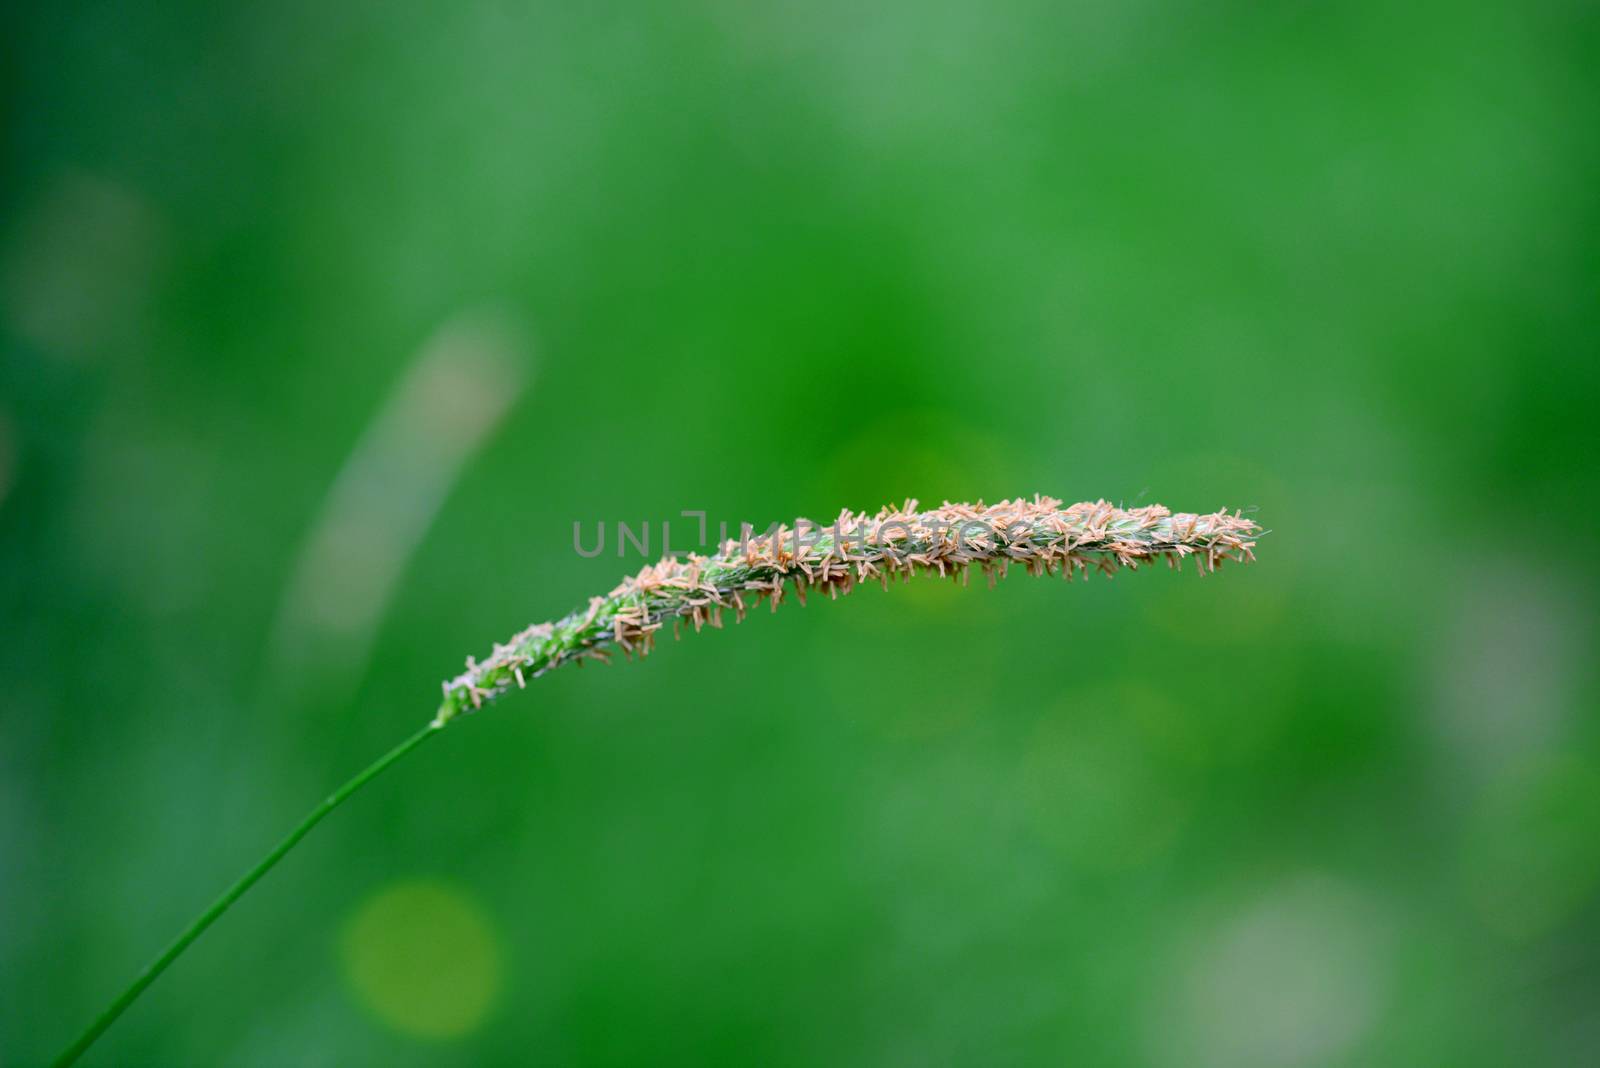 Tall Grass Seed close detail with green natural background